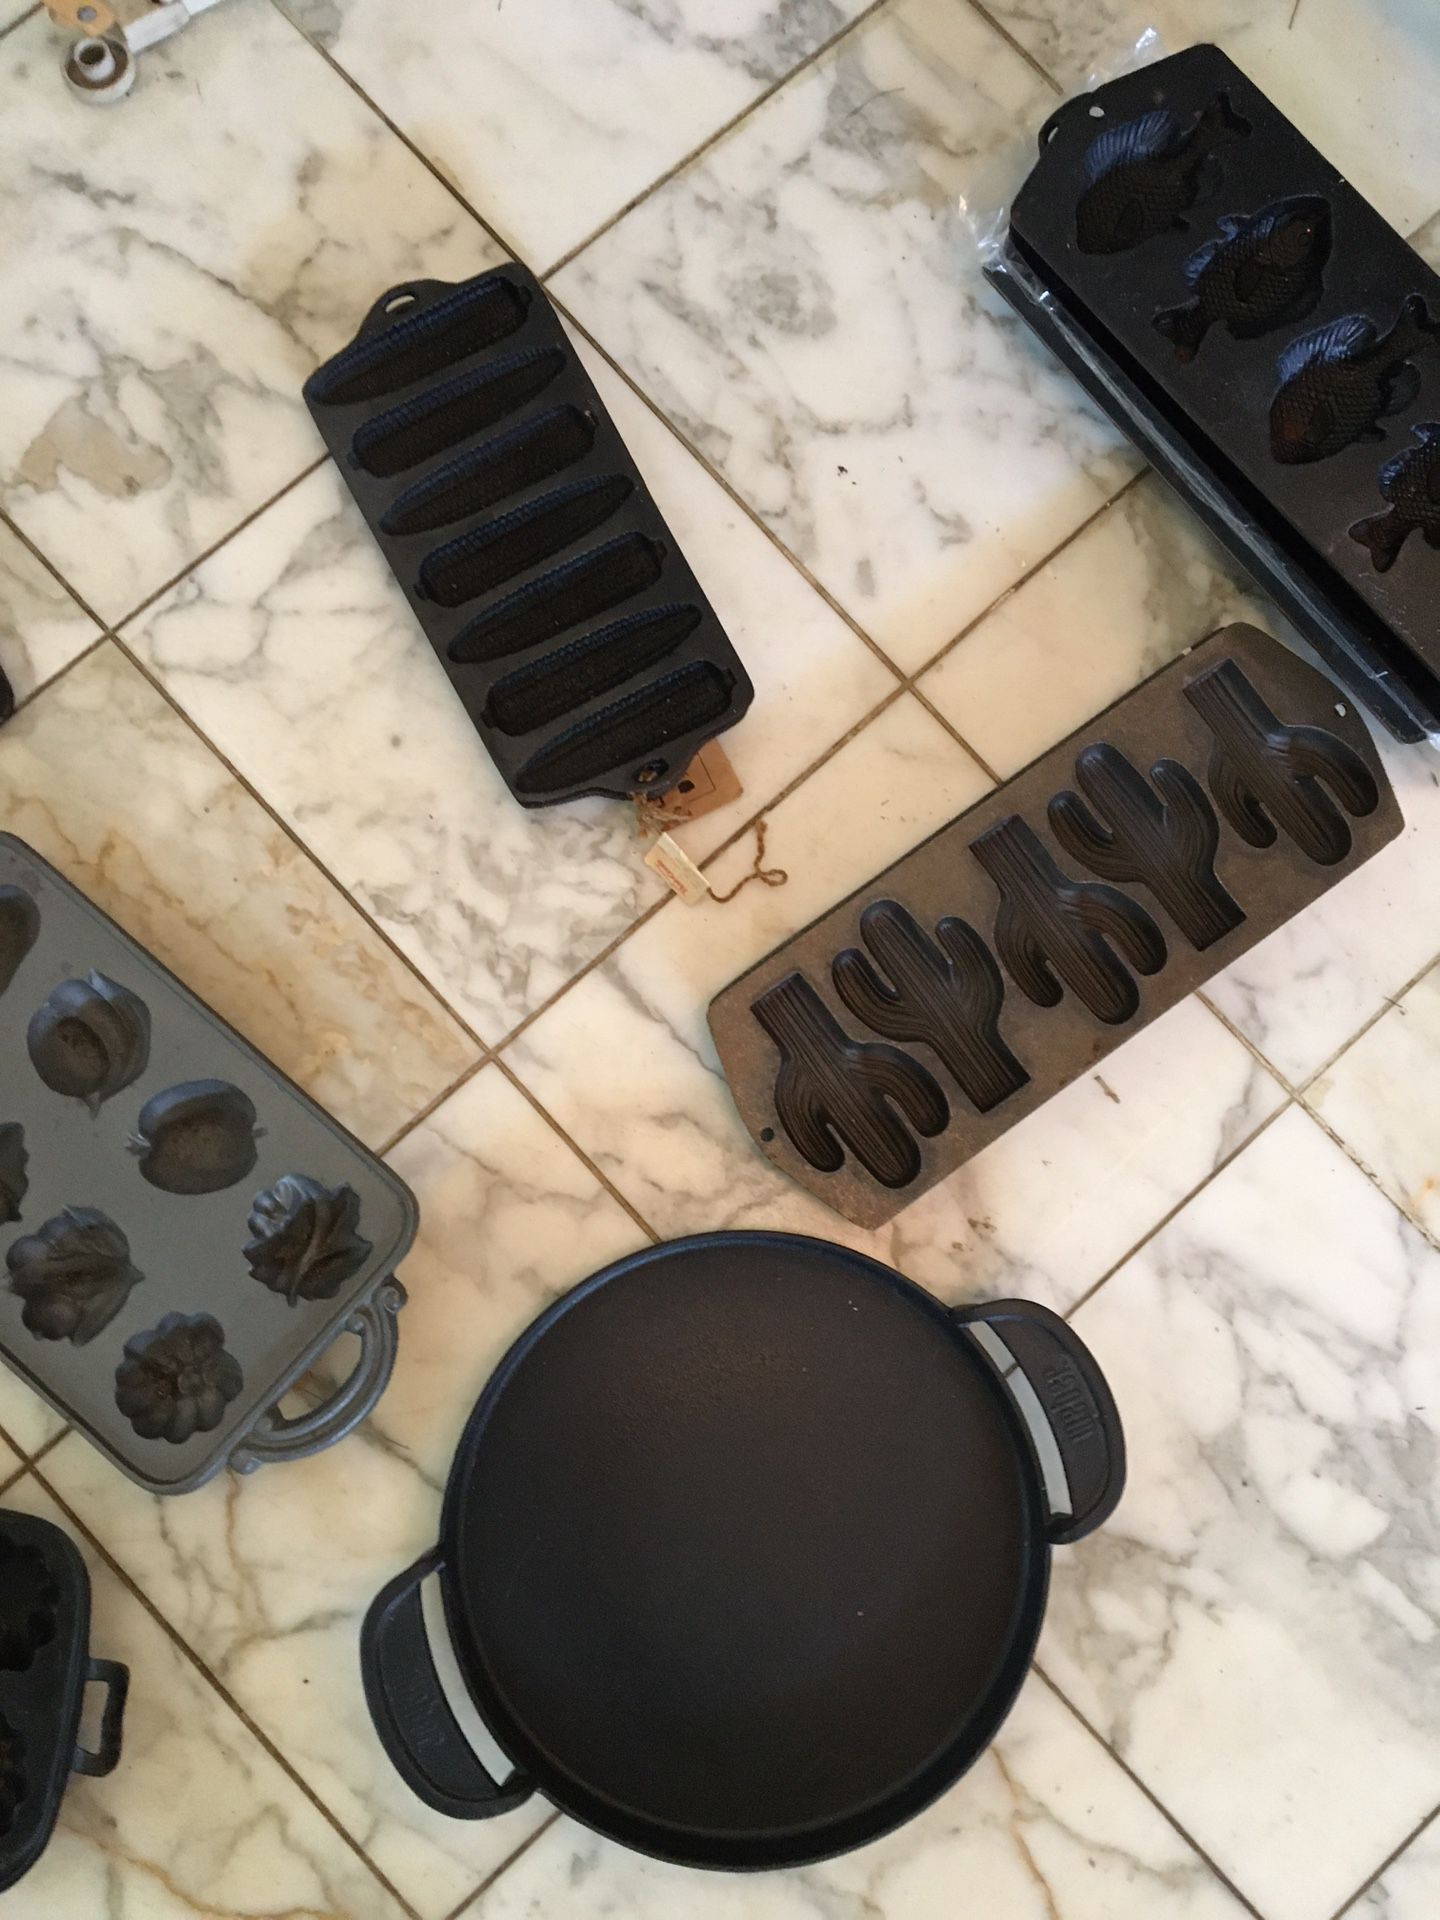 Extremely rare cast iron baking pans $60 each